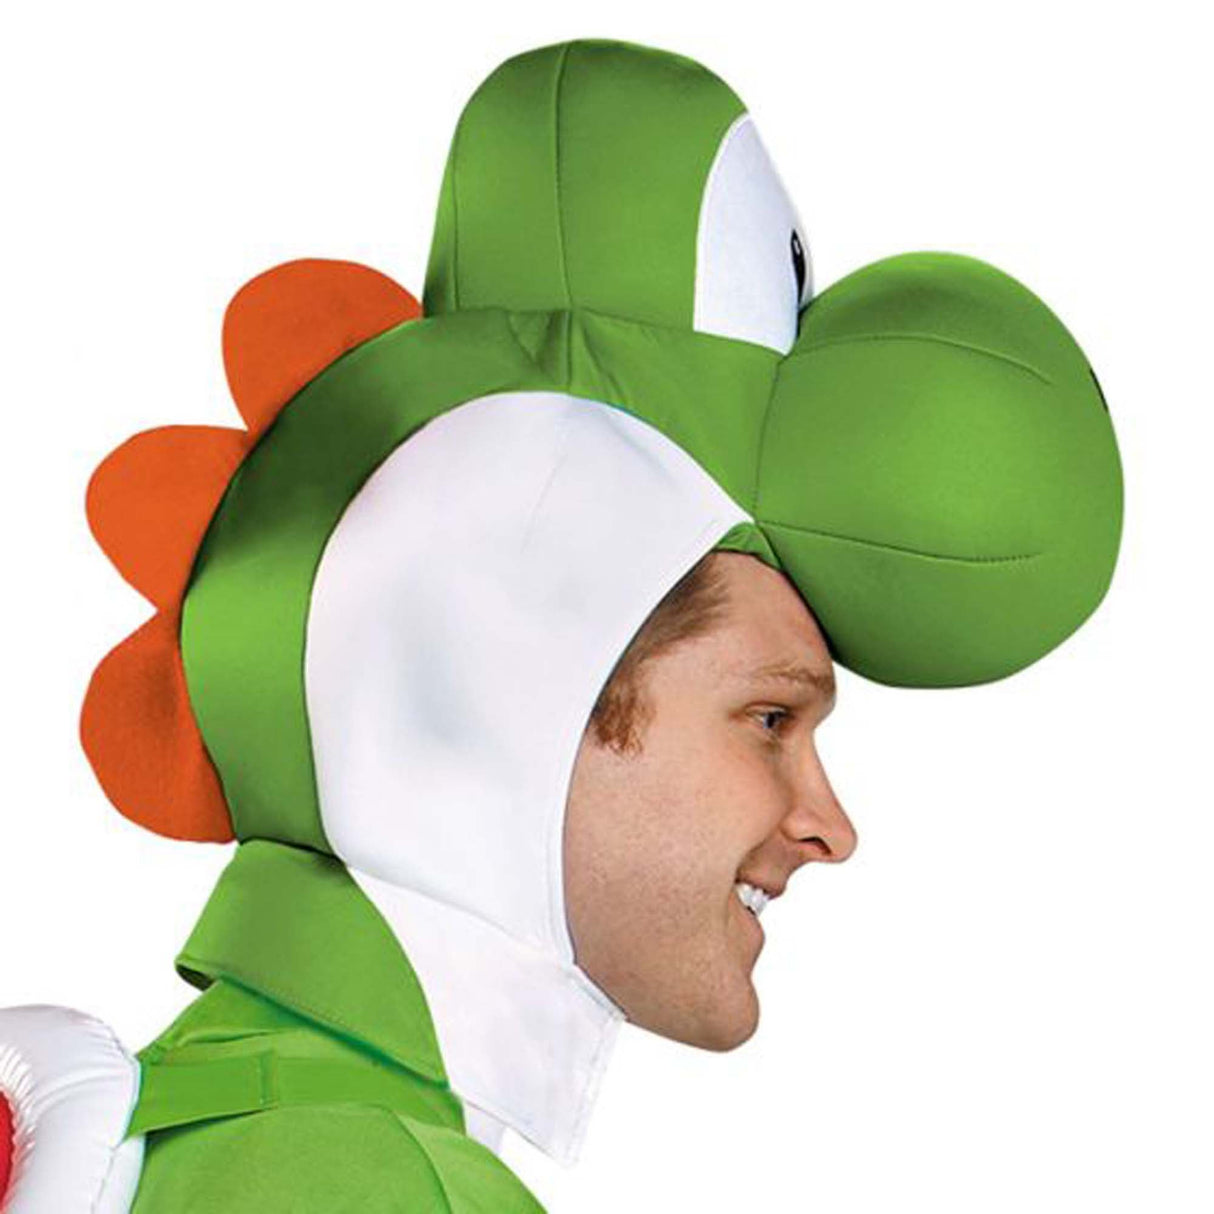 DISGUISE (TOY-SPORT) Costumes Nintendo Super Mario Bros Yoshi Deluxe Costume for Adults, Green Jumpsuit with Attached Tail